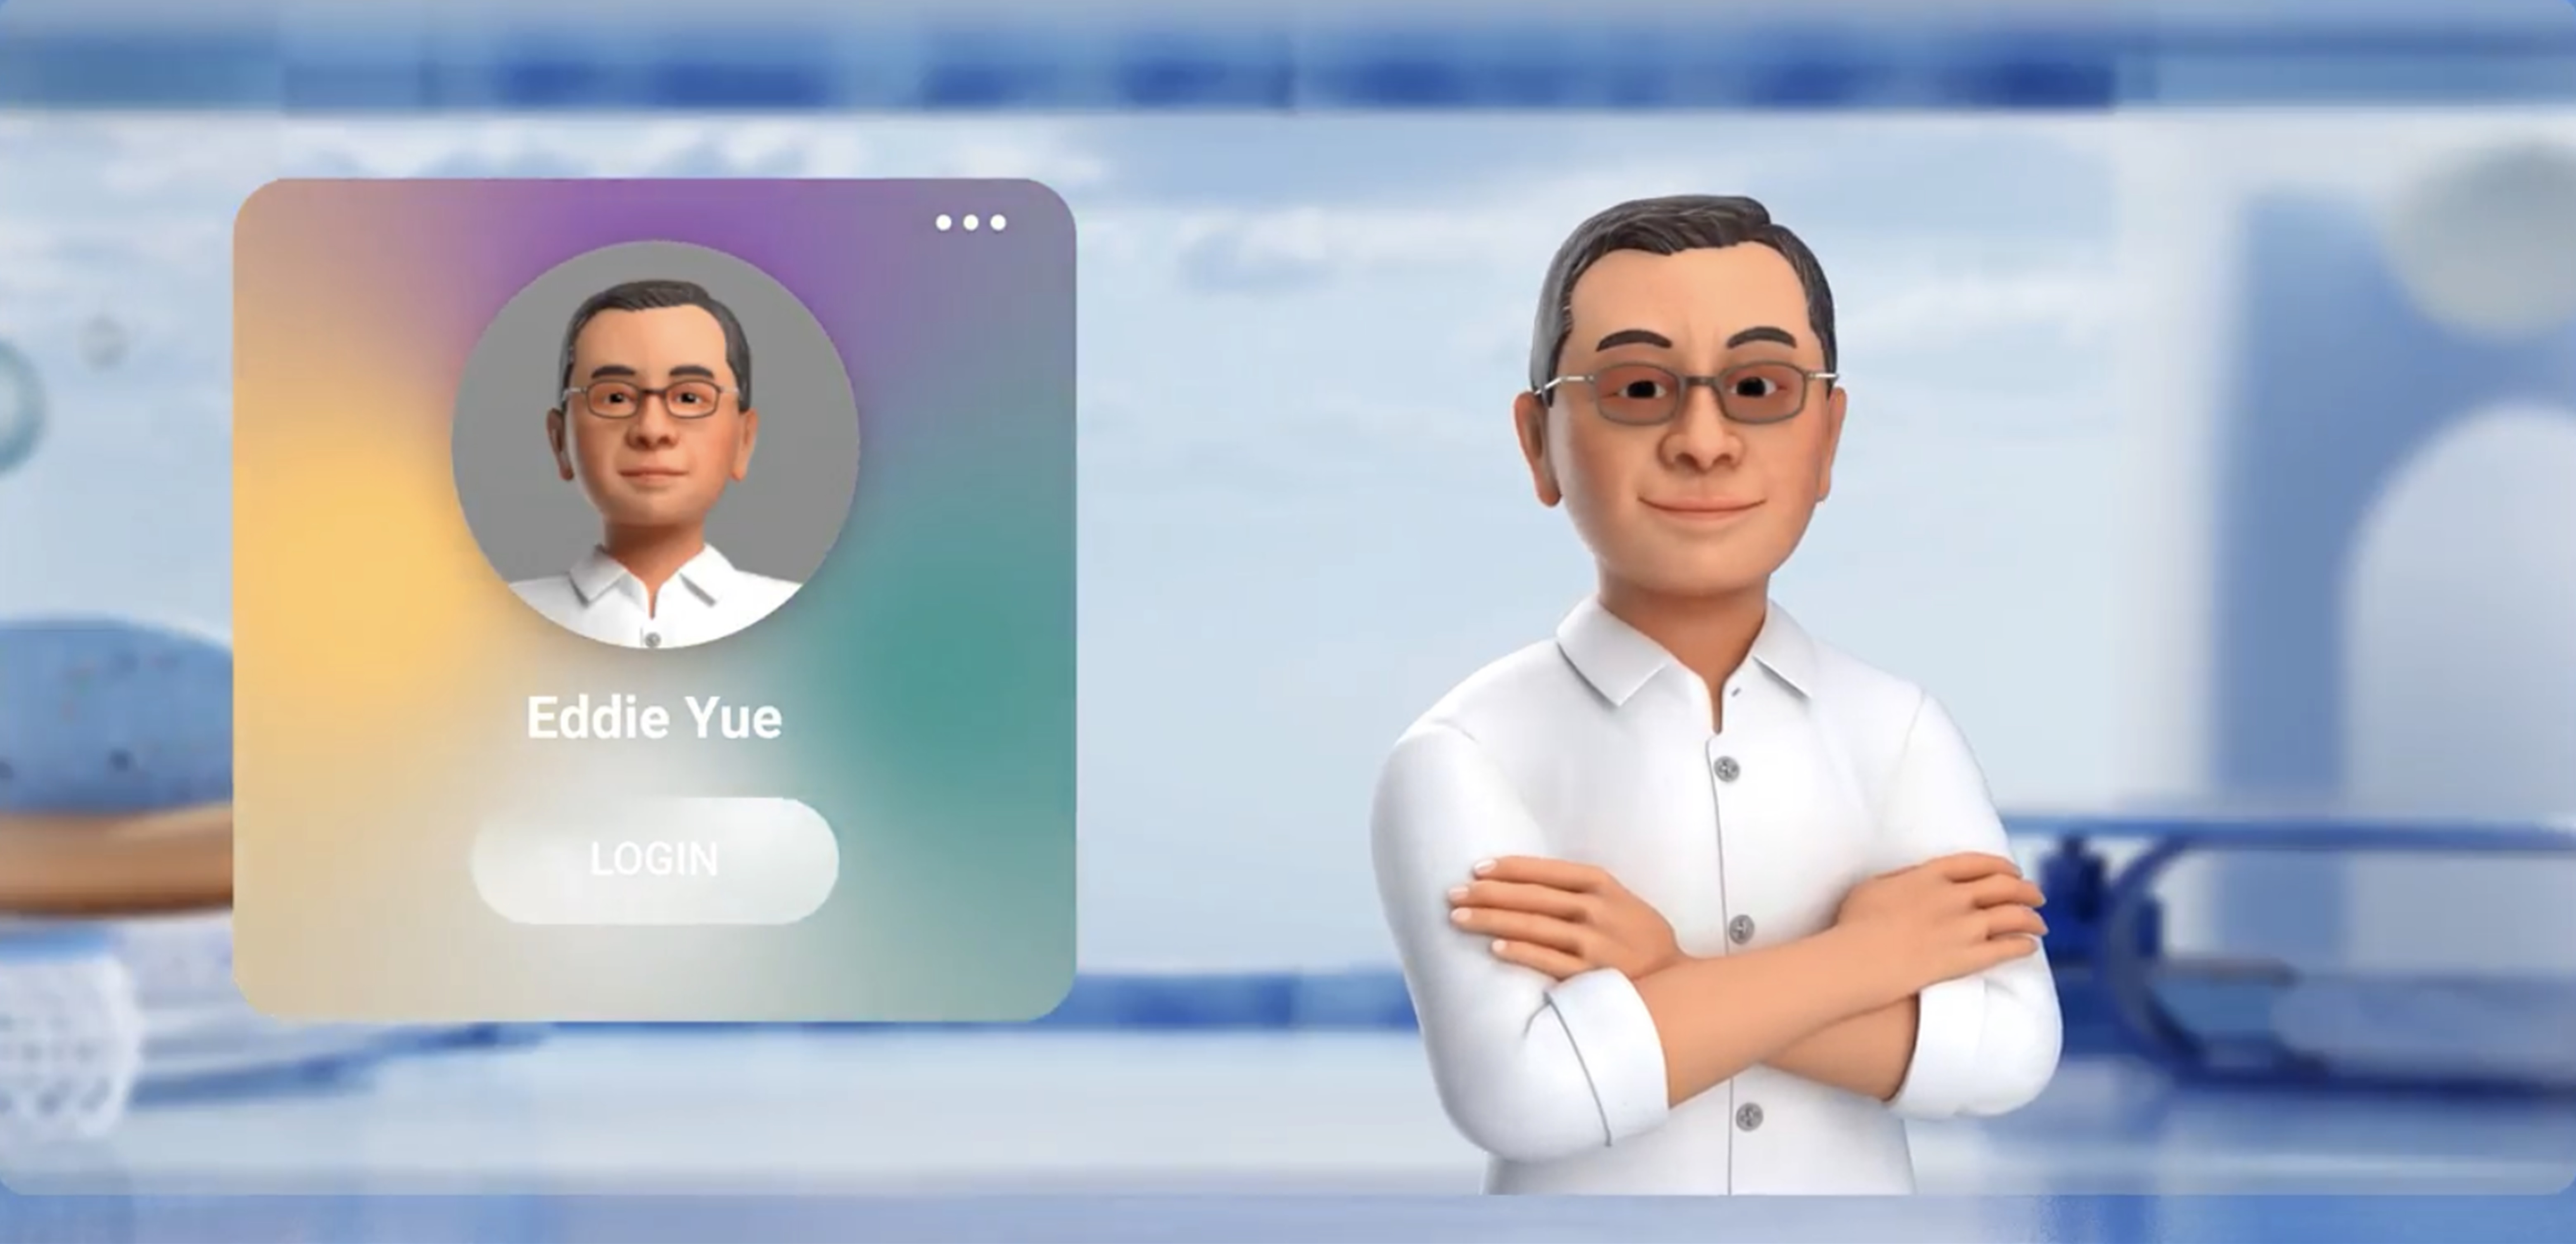 During the event, the Chief Executive of the HKMA, Mr Eddie Yue, appeared as an avatar before meeting the audience on stage.